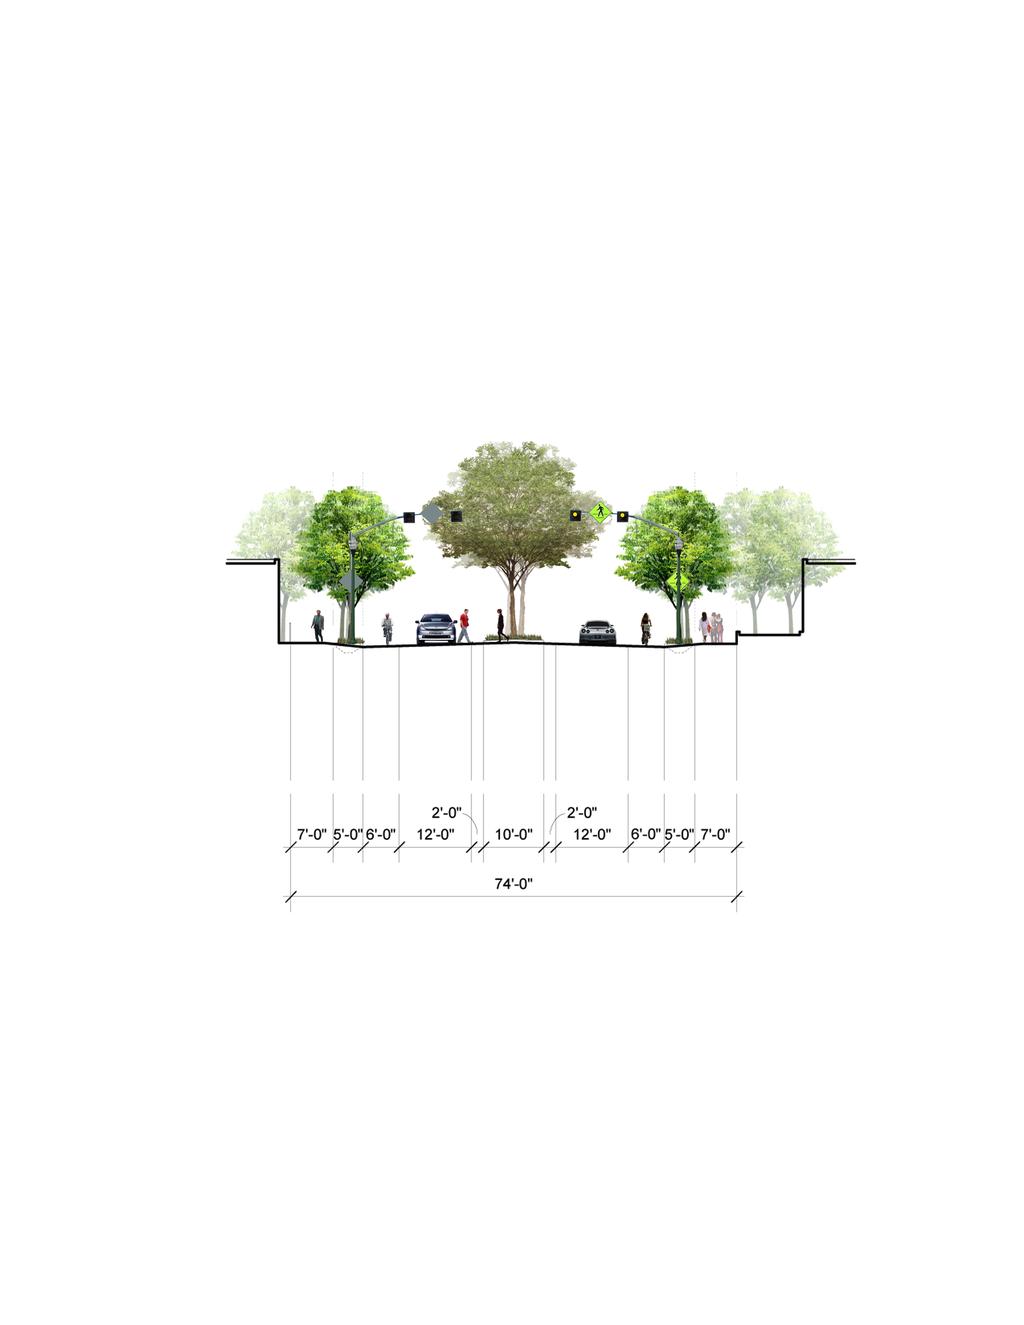 Proposed Median Ornamental Tree Ocean Park Boulevard Proposed Sidewalk Extension with Parkway/Bioswale Existing Tree Removed Proposed Street Trees at Bioswale Proposed Painted Bike Lanes Proposed